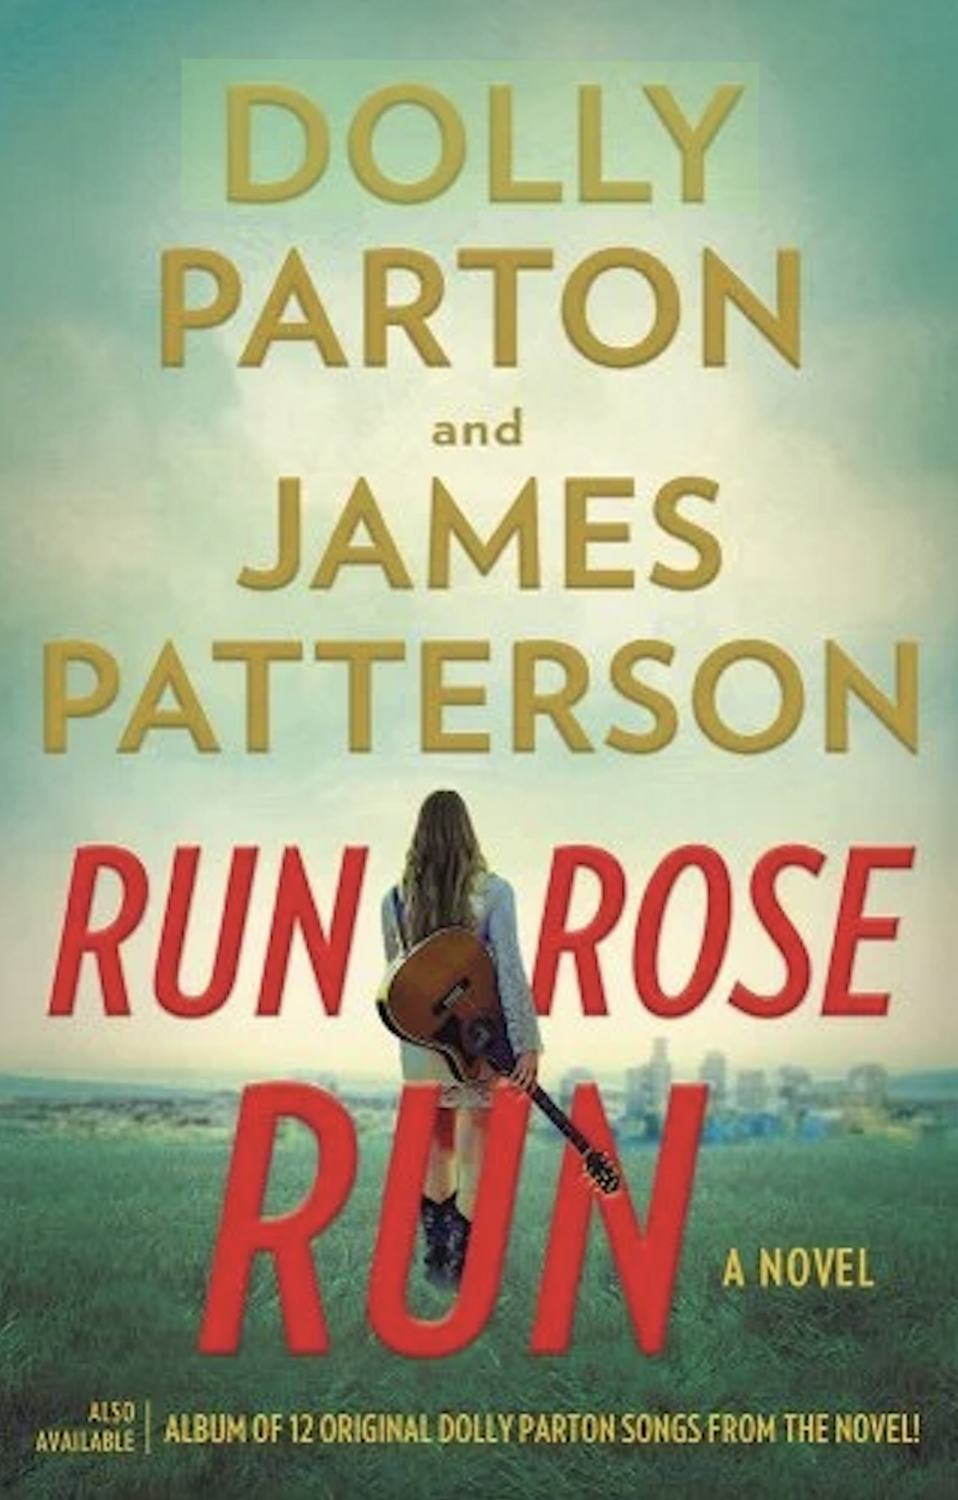 Run Rose Run by Dolly Parton & James Patterson RELEASE DATE MARCH 7th